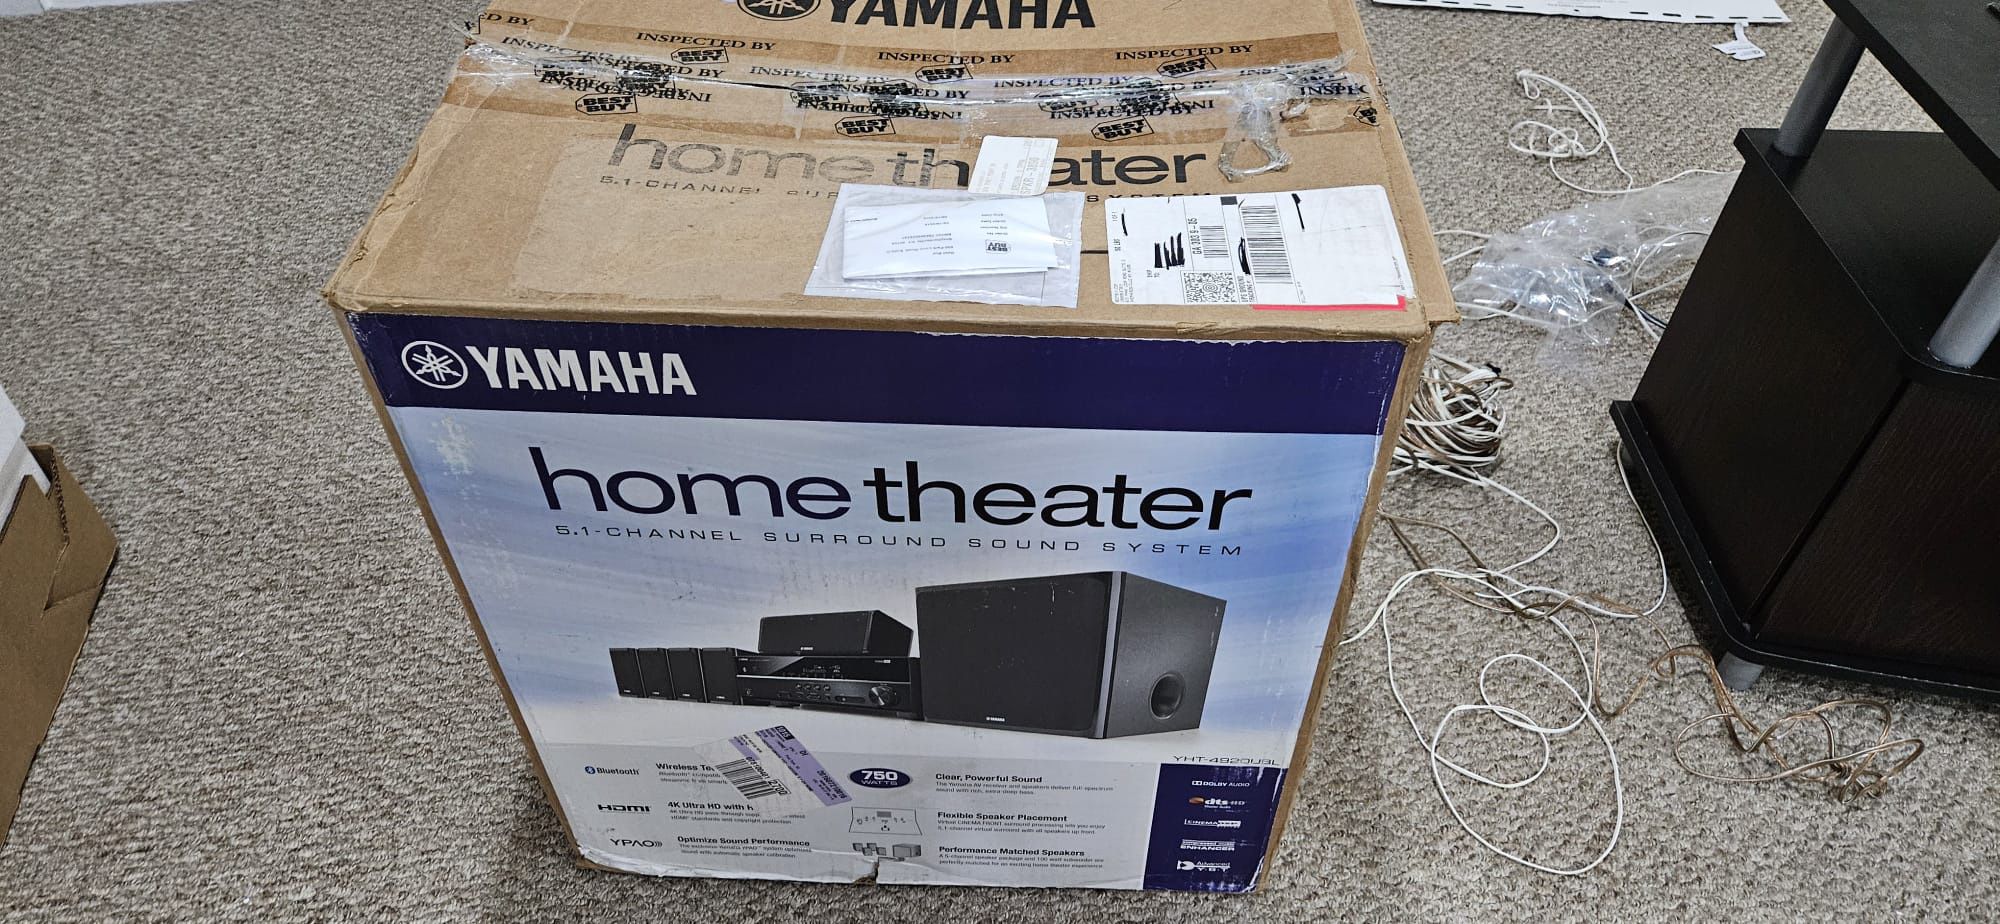 Yamaha 5.1 Home theater System - 5 Speakers, Sub Woofer, Receiver 